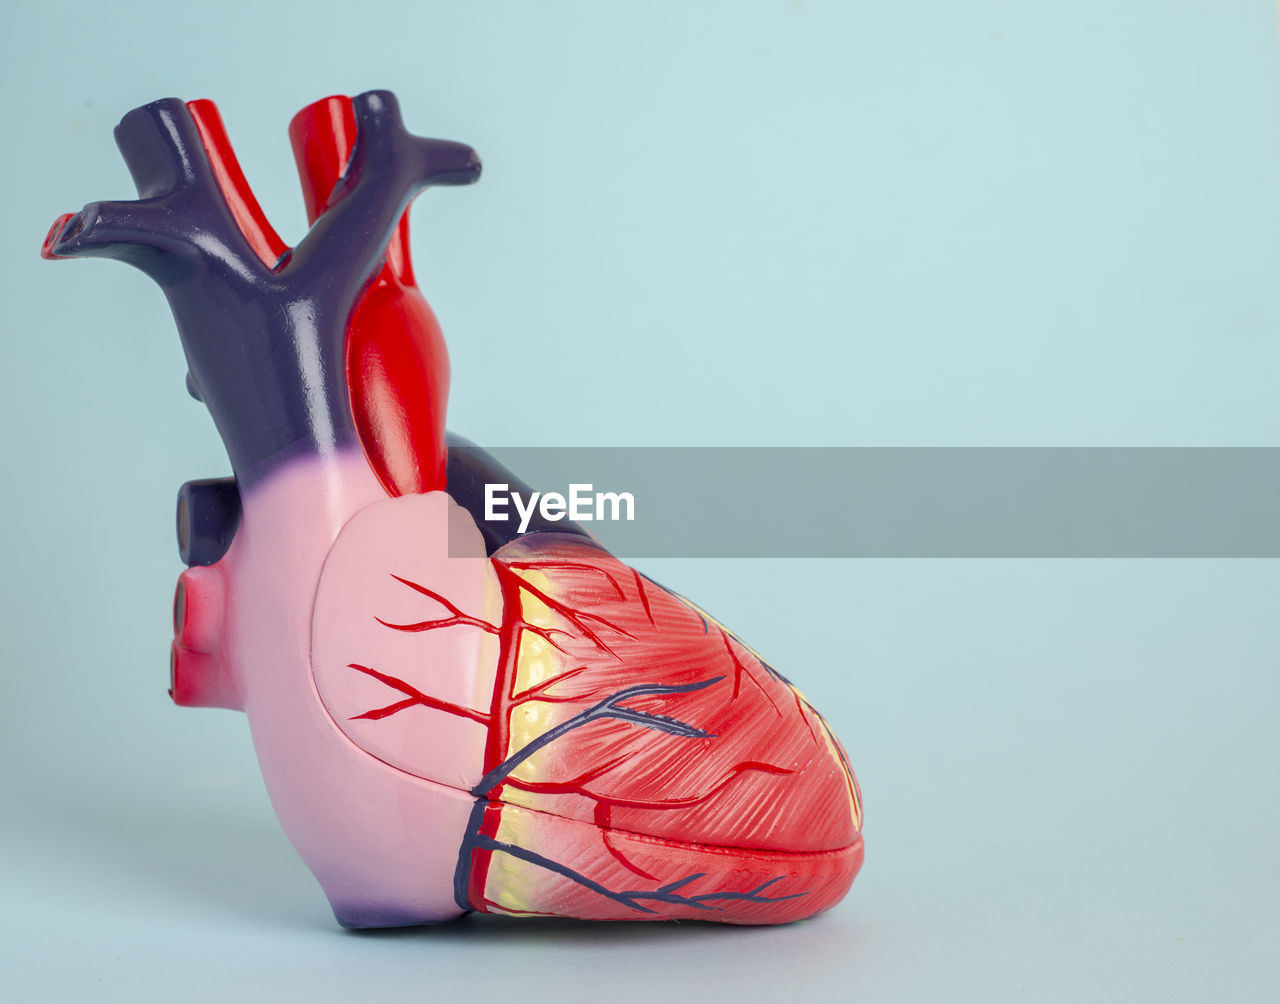 Close-up of heart model against blue background